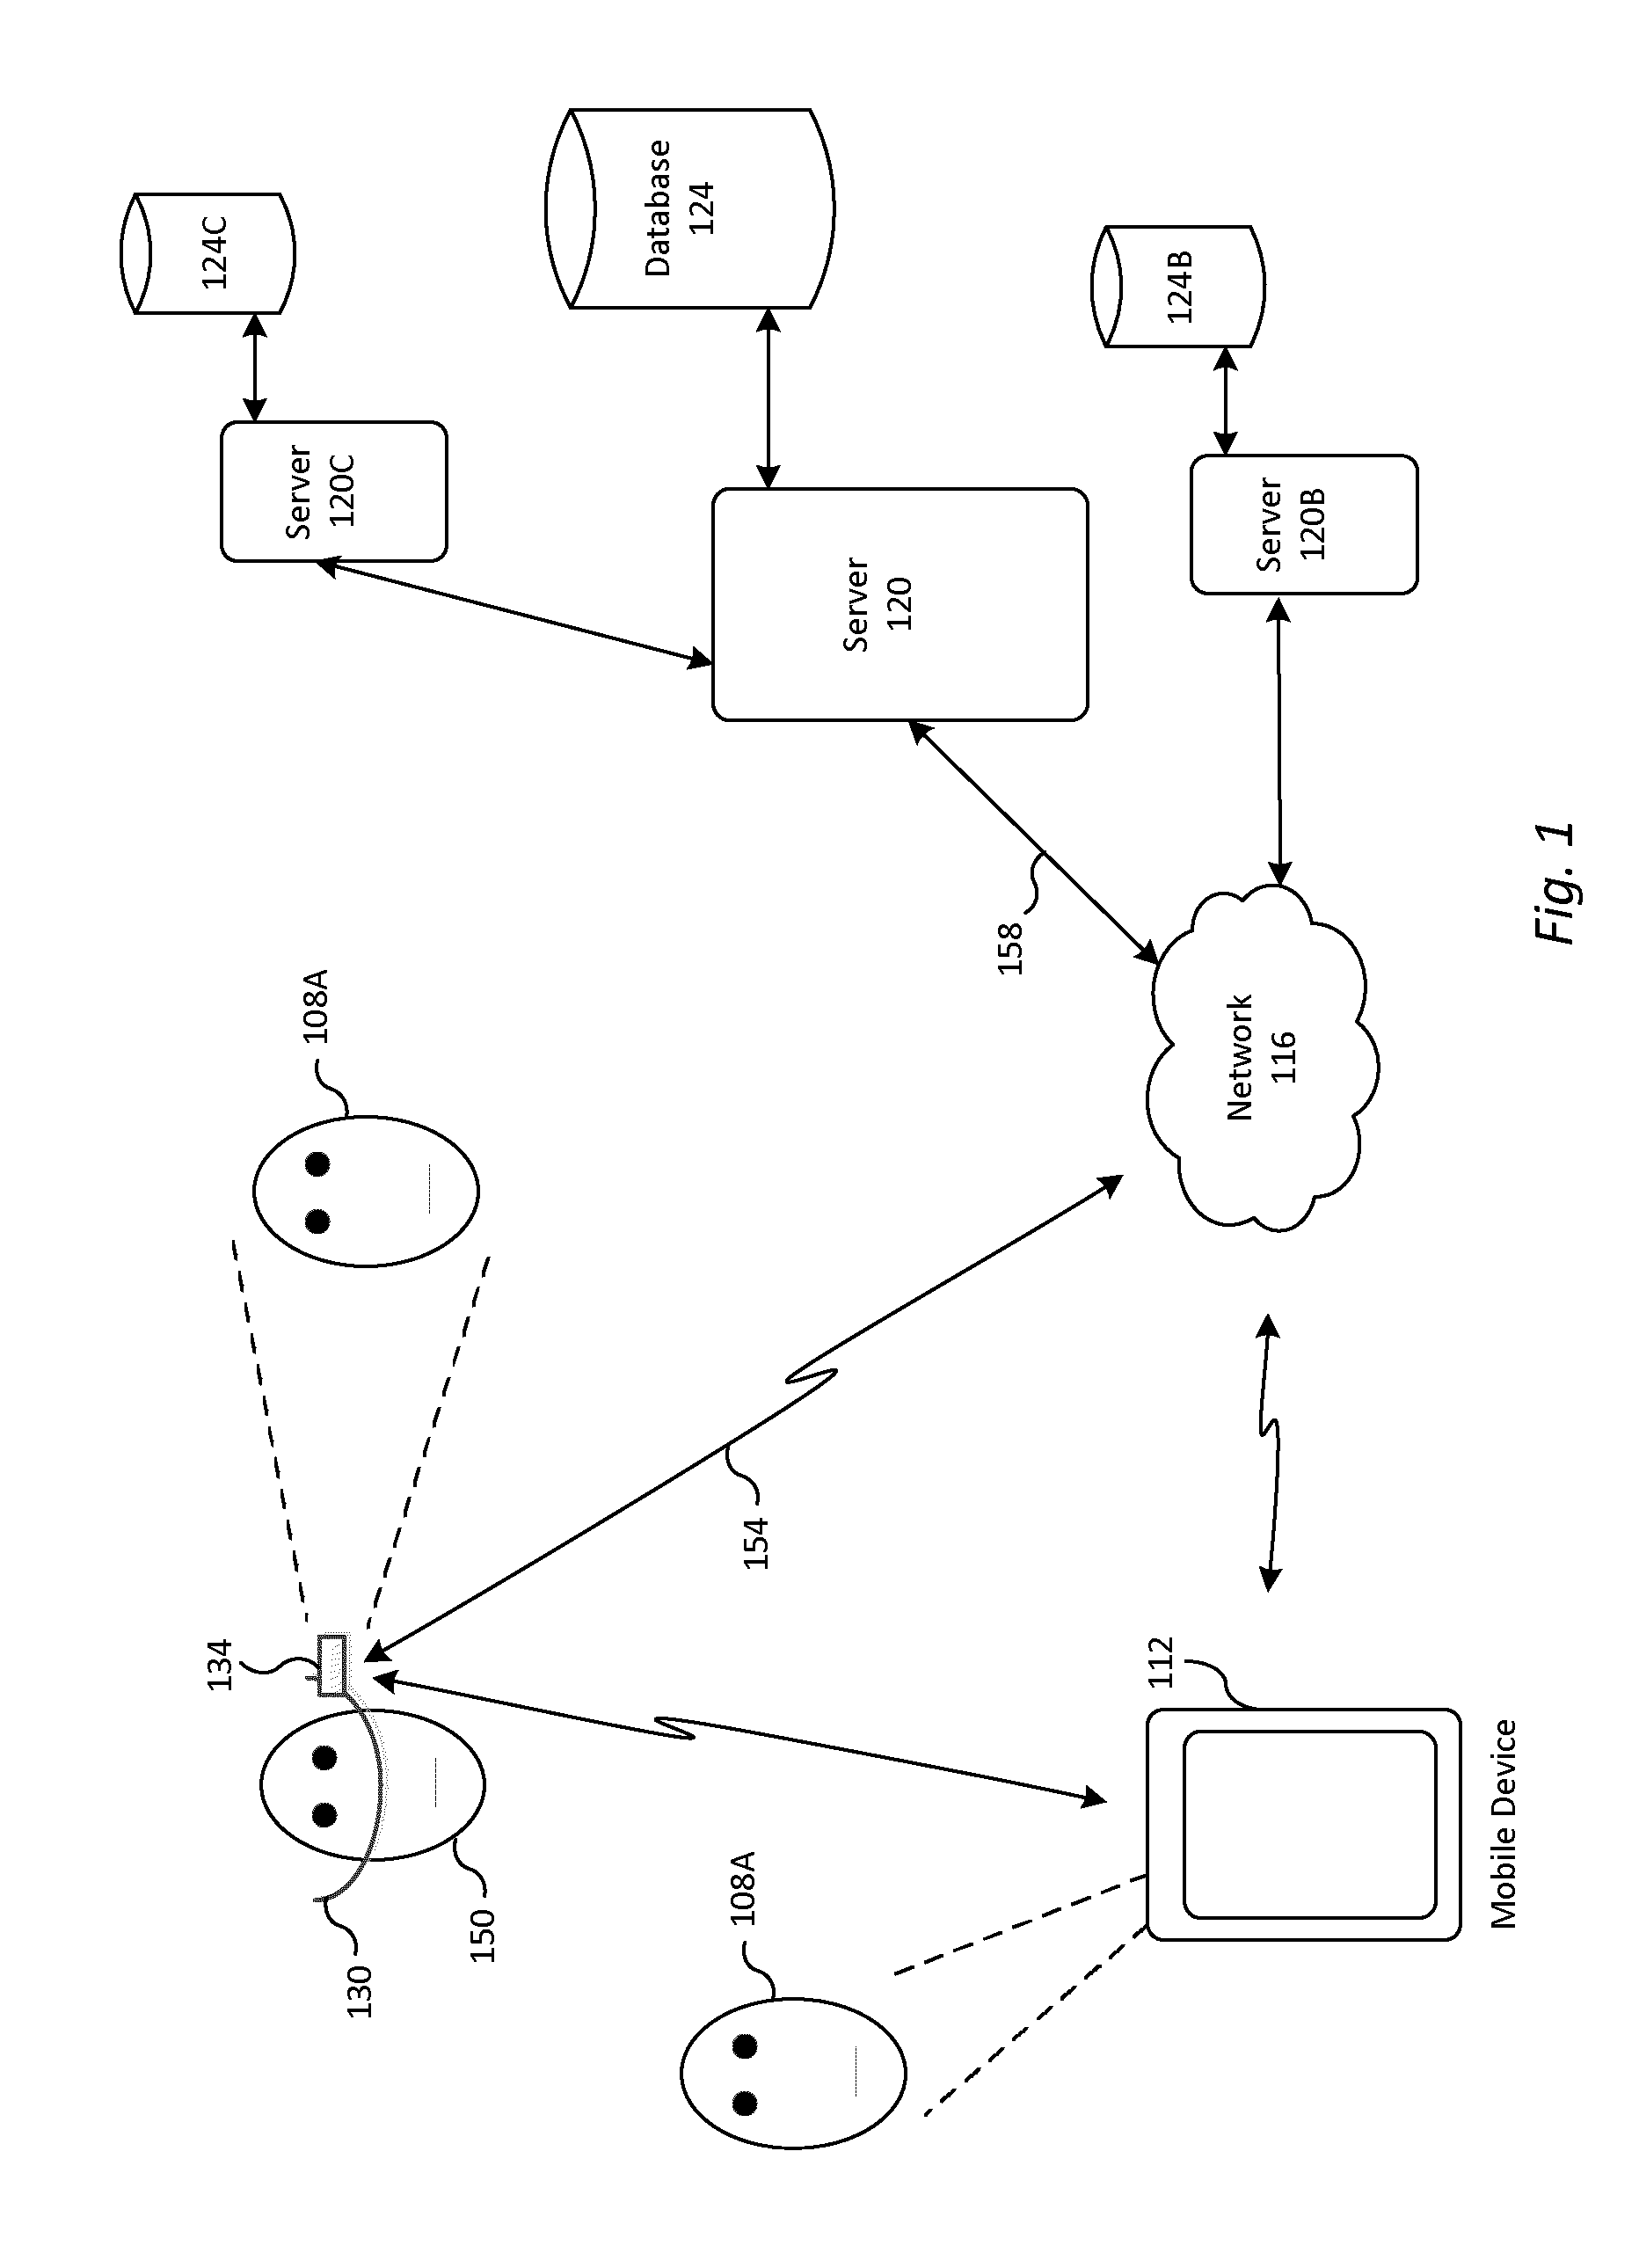 Methods and Systems for Obtaining Information Based on Facial Identification